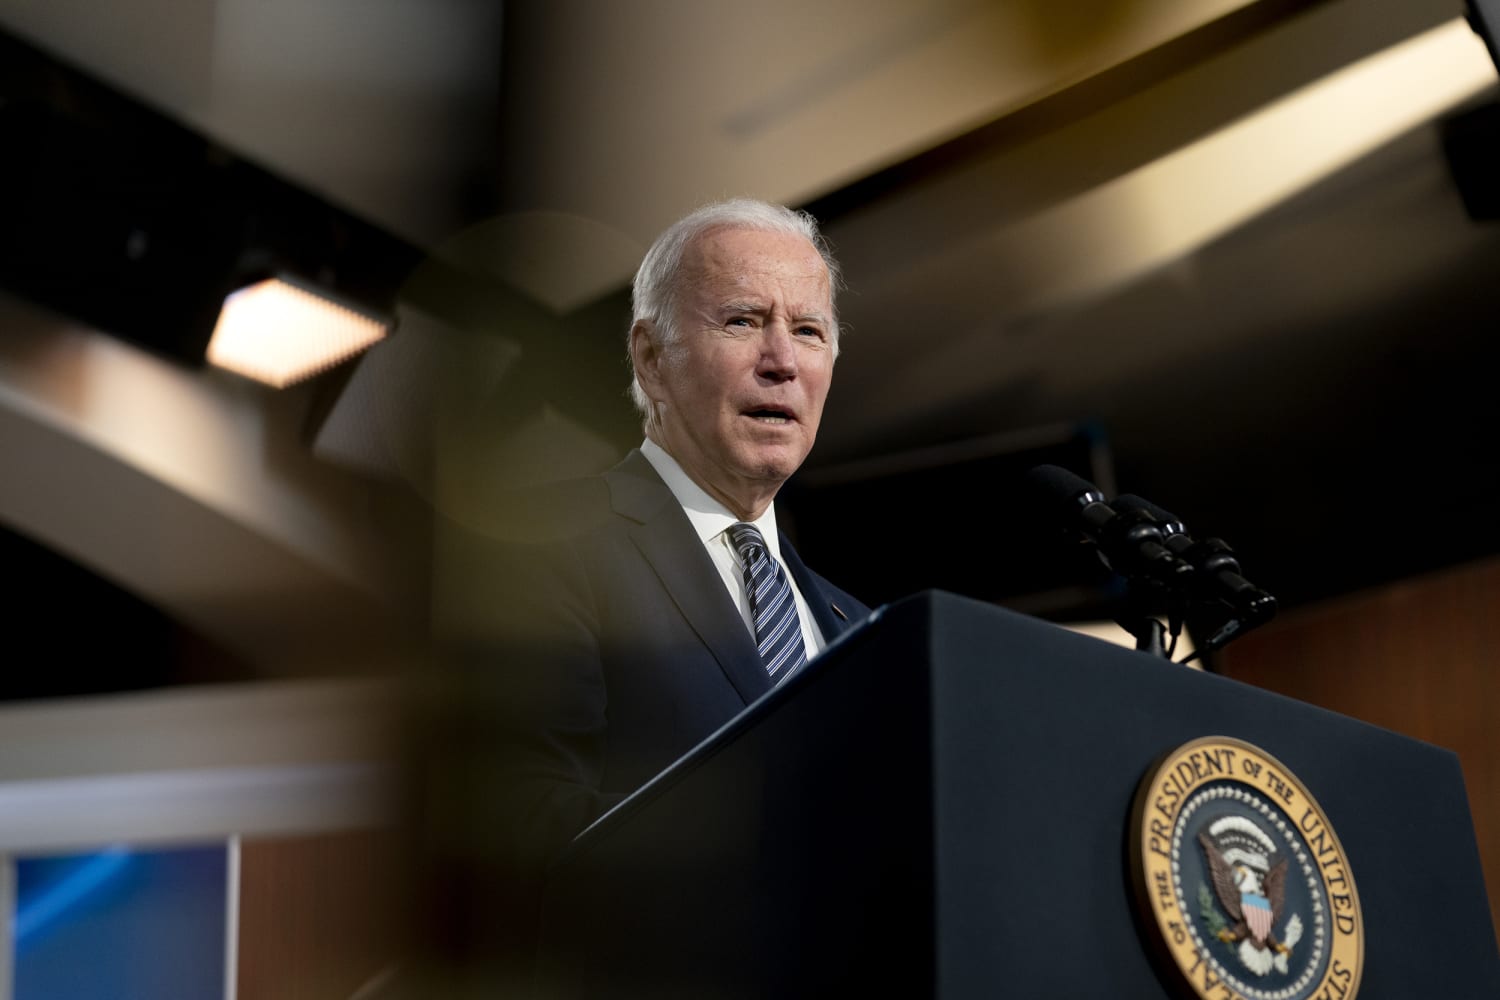 After a nearly half-century in public office, Biden faces his most consequential test yet